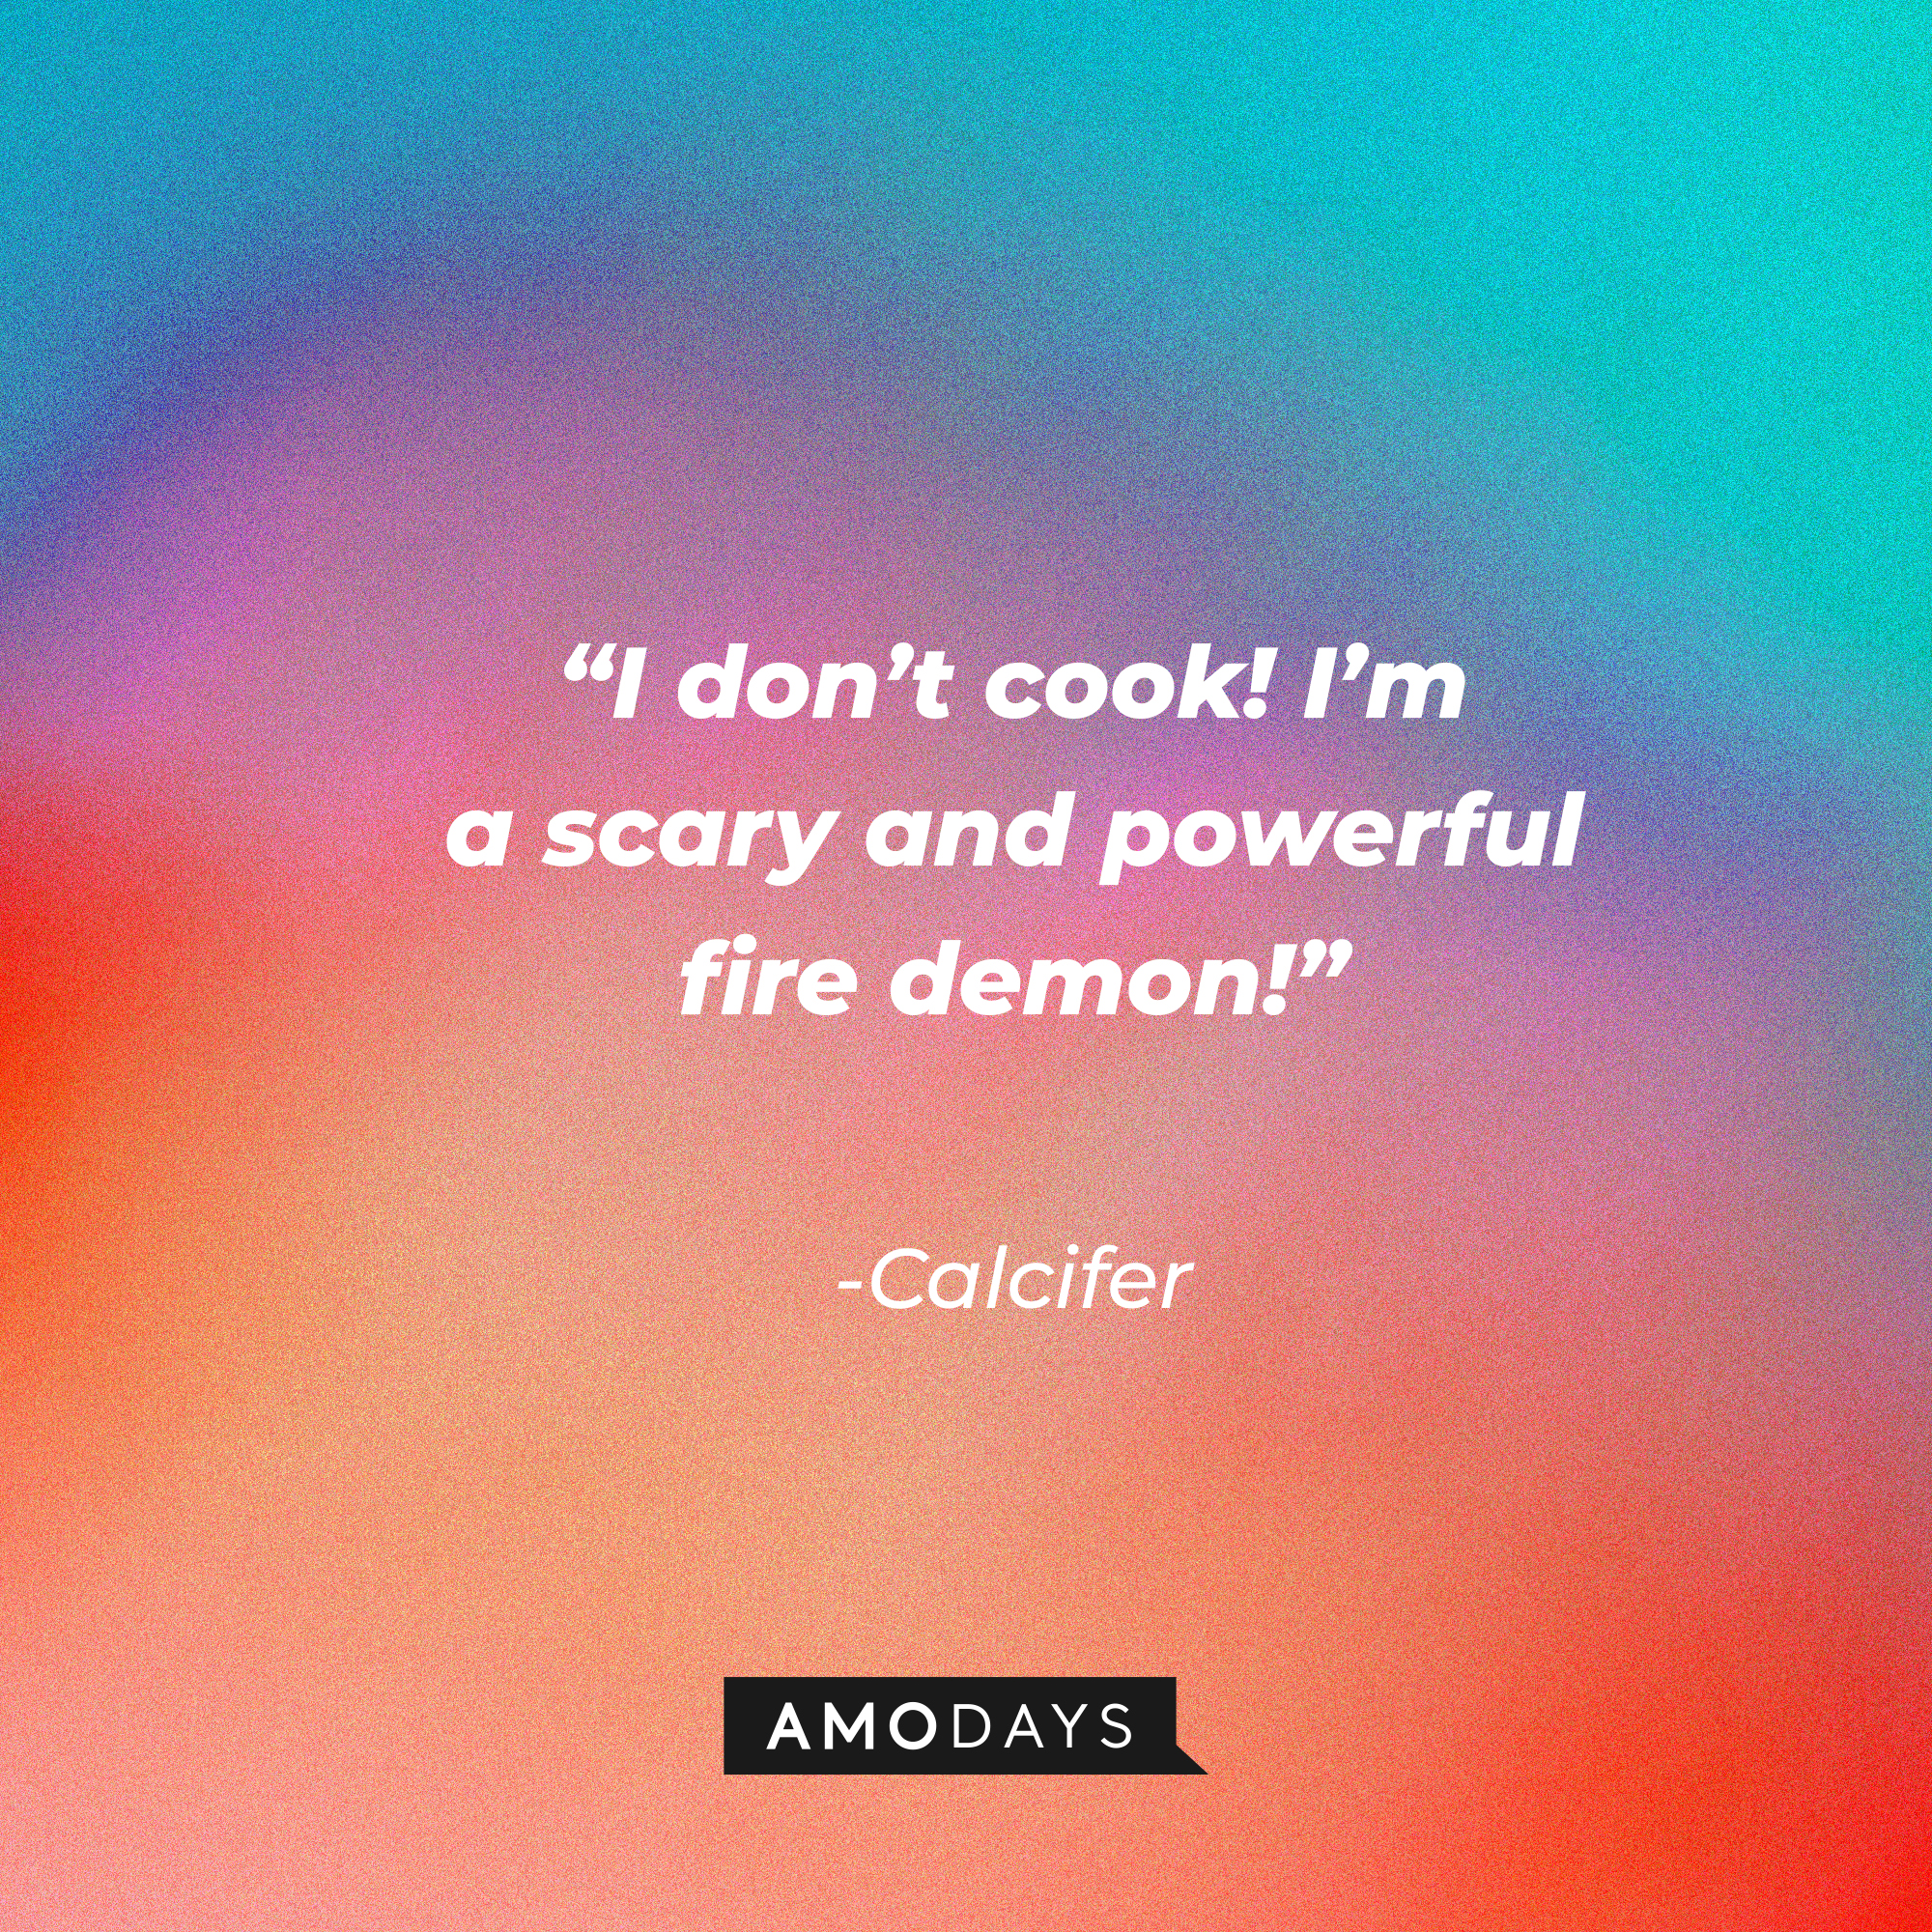 Calcifer’s quote: “I don’t cook! I’m a scary and powerful fire demon!” | Source: AmoDays